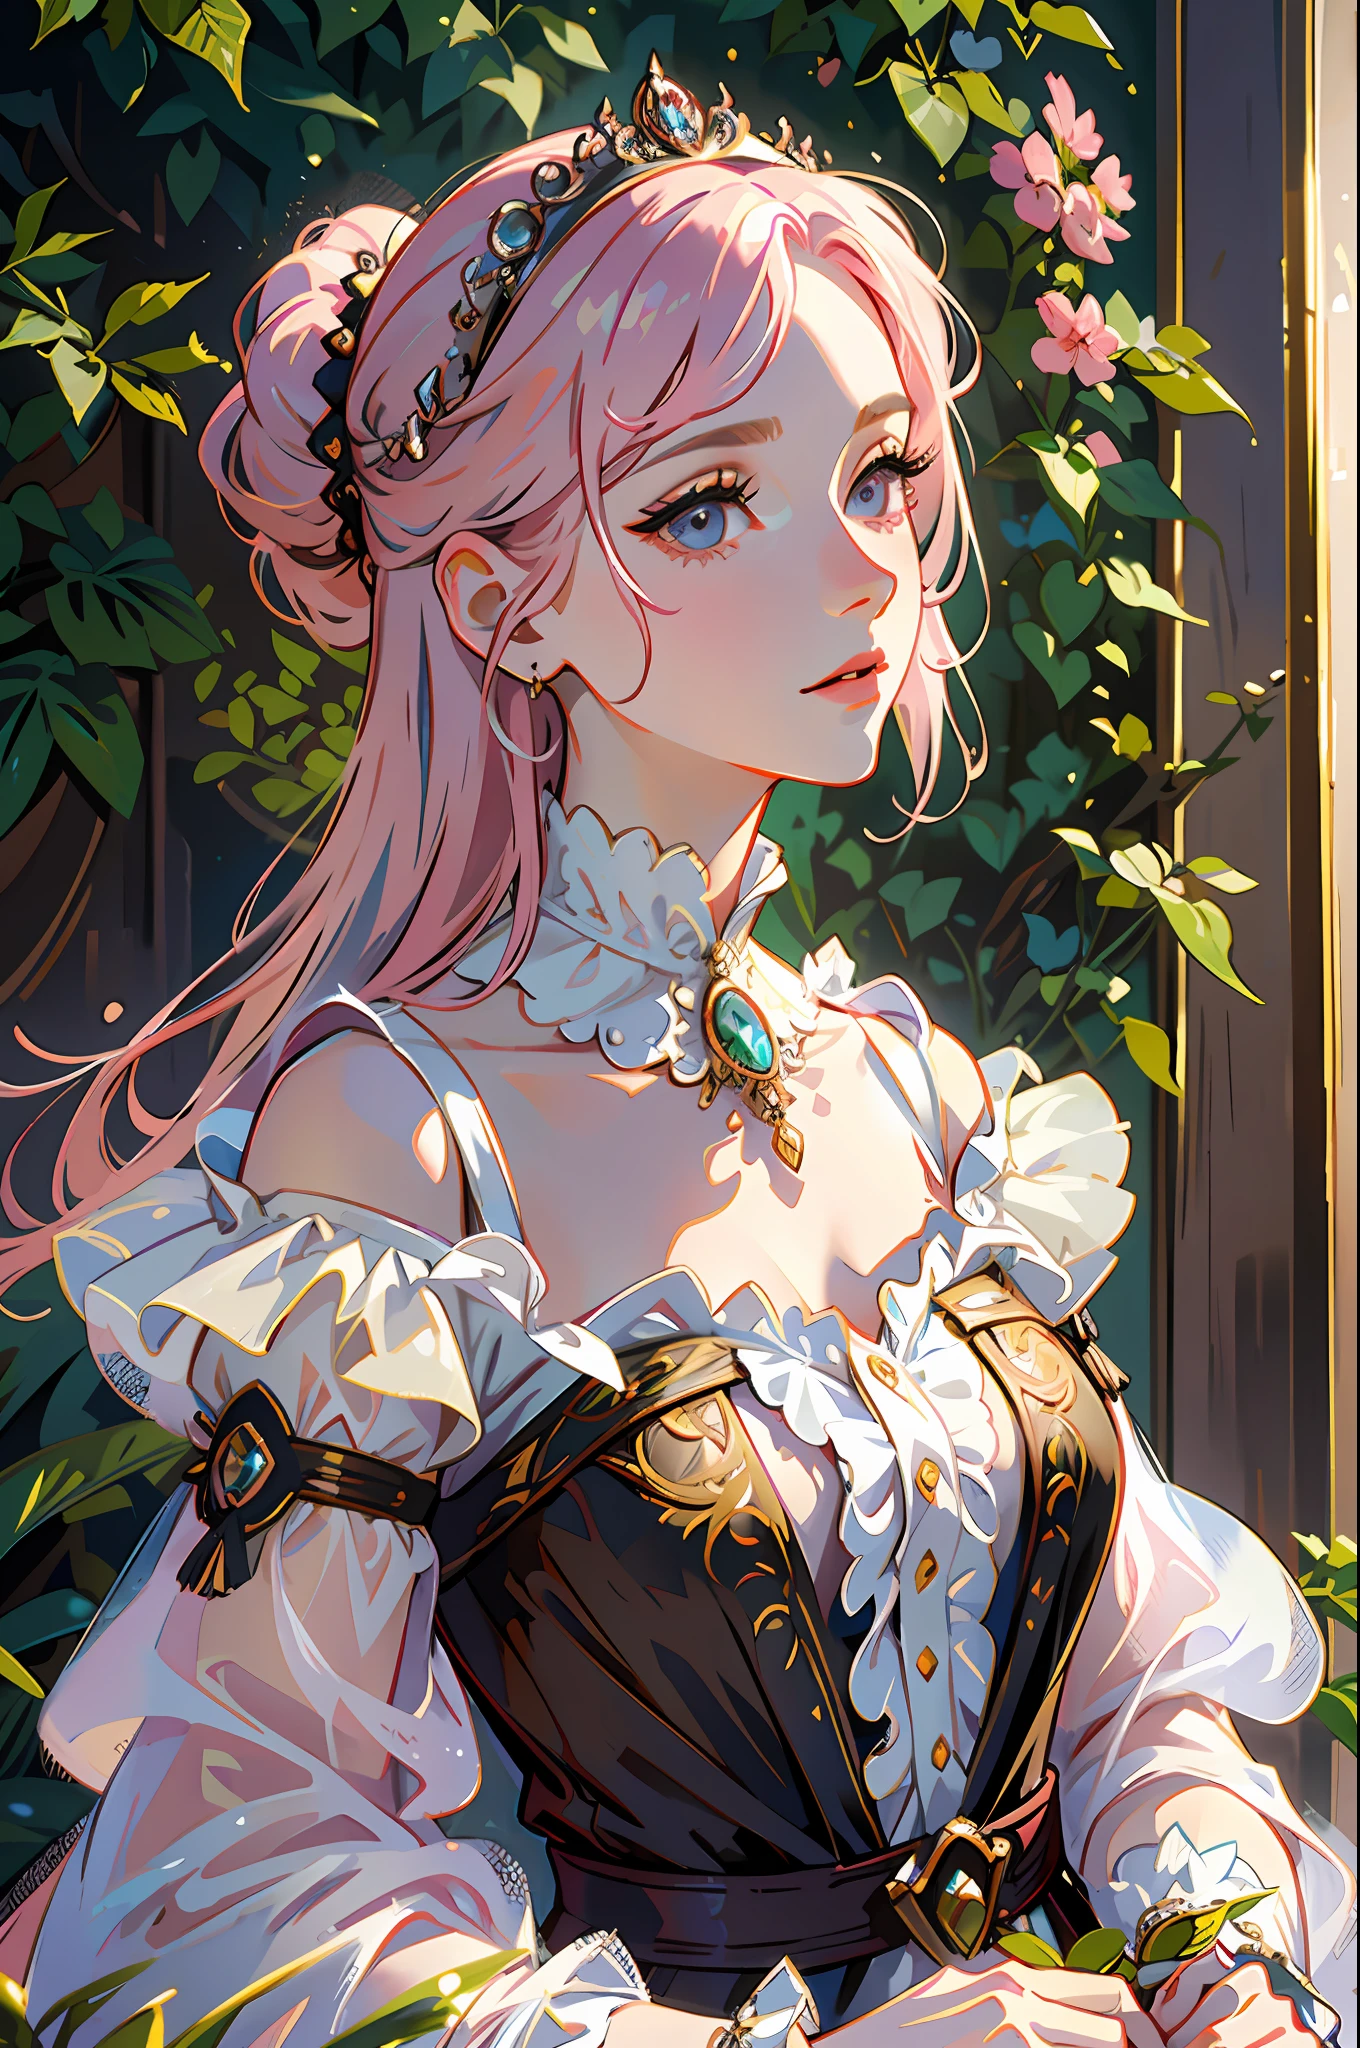 masterpiece, best quality, 1woman, mature, adult, different fashion, different color, finely detailed eyes and detailed face, intricate details, happy, fantasy, 18th-century European aristocratic style, noble, garden, baroque, woman with pink hair, delicate